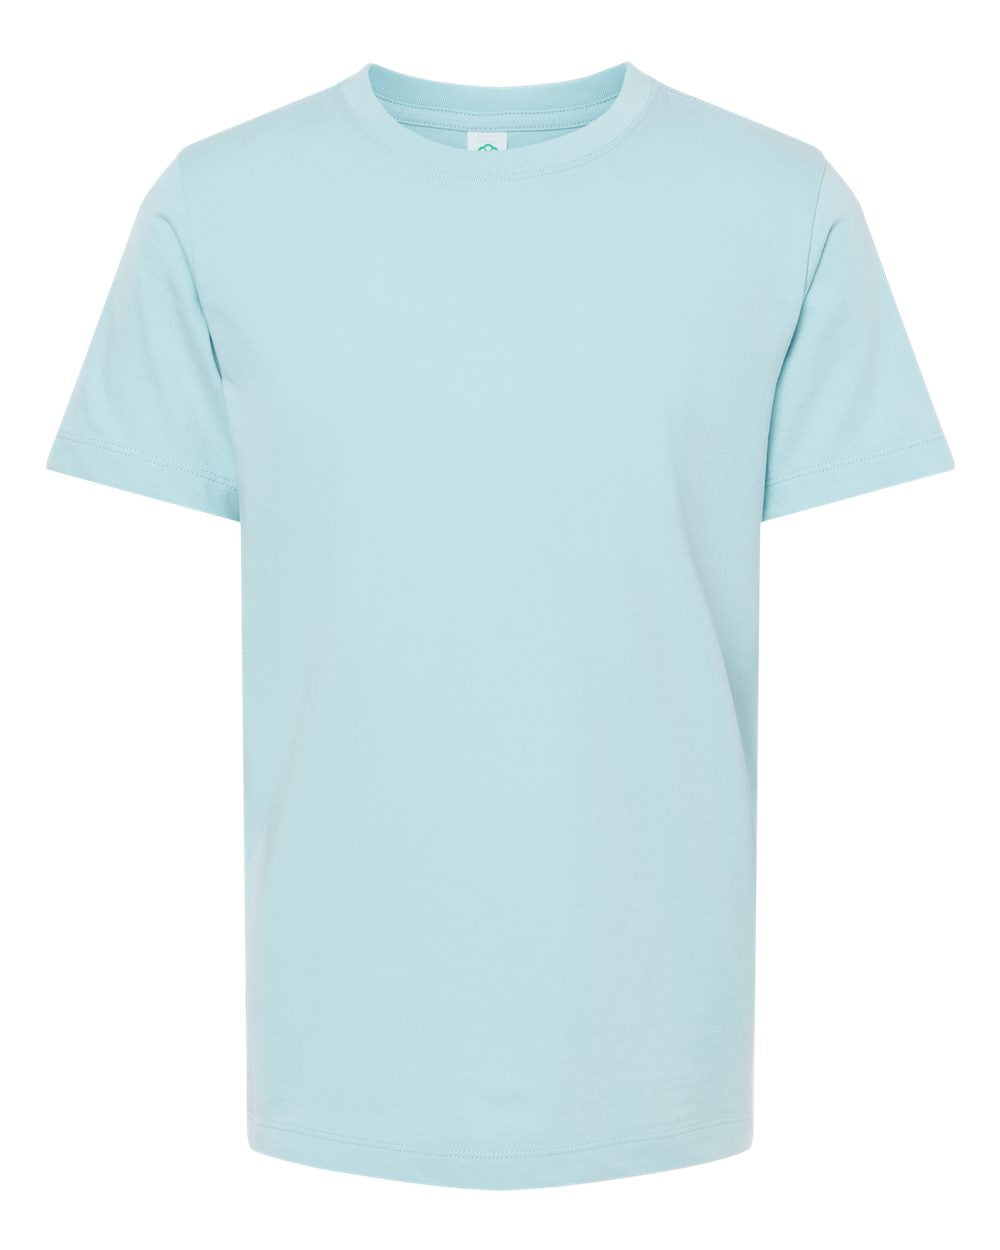 Softshirts® Youth Organic Cotton T-shirt in light blue